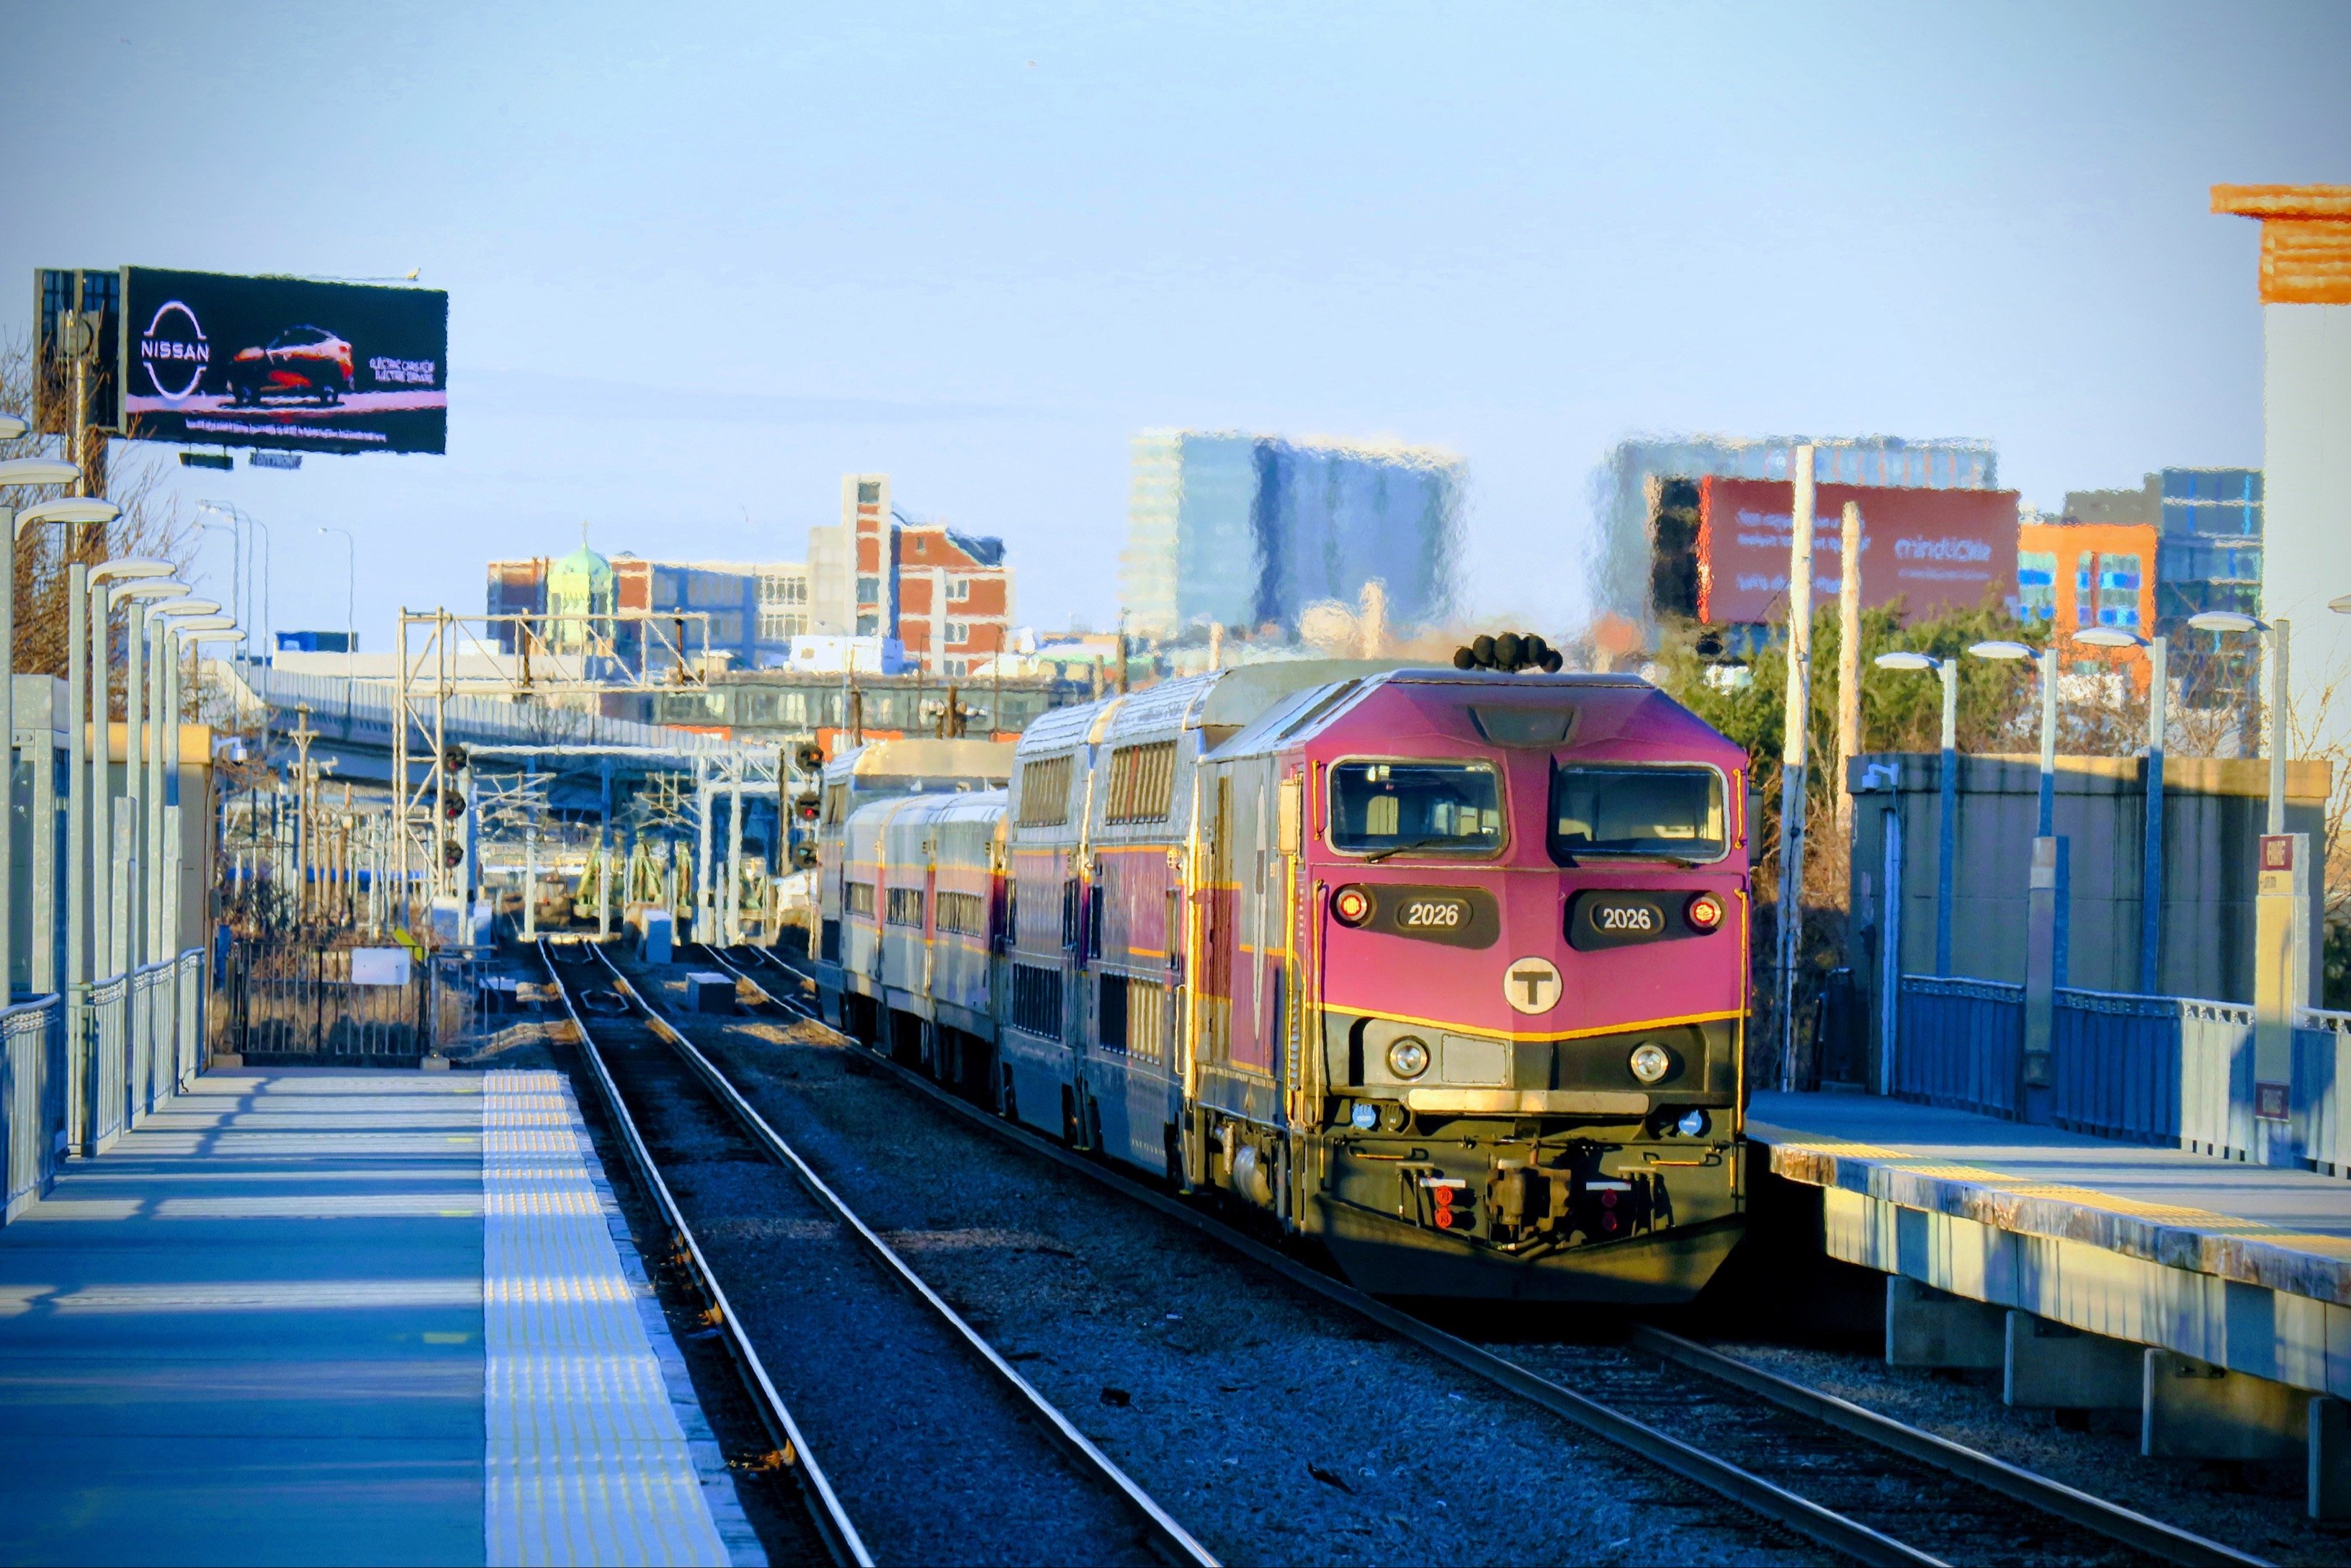 MBTA Commuter Rail train on the Fairmount Line with the City of Boston in the background.